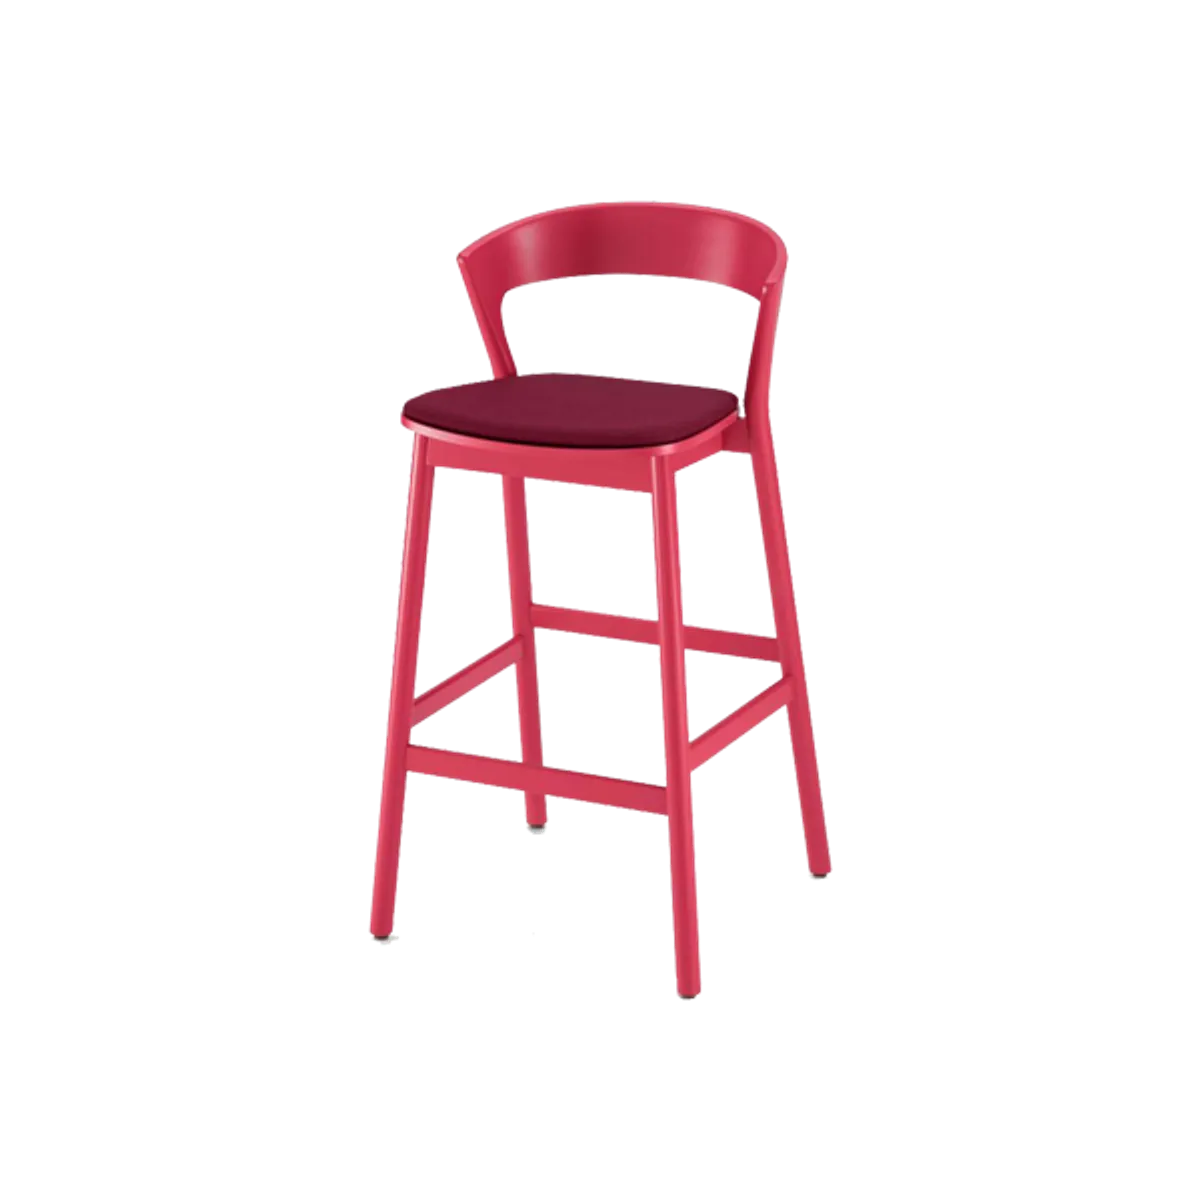 Thora soft bar stool Inside Out Contracts